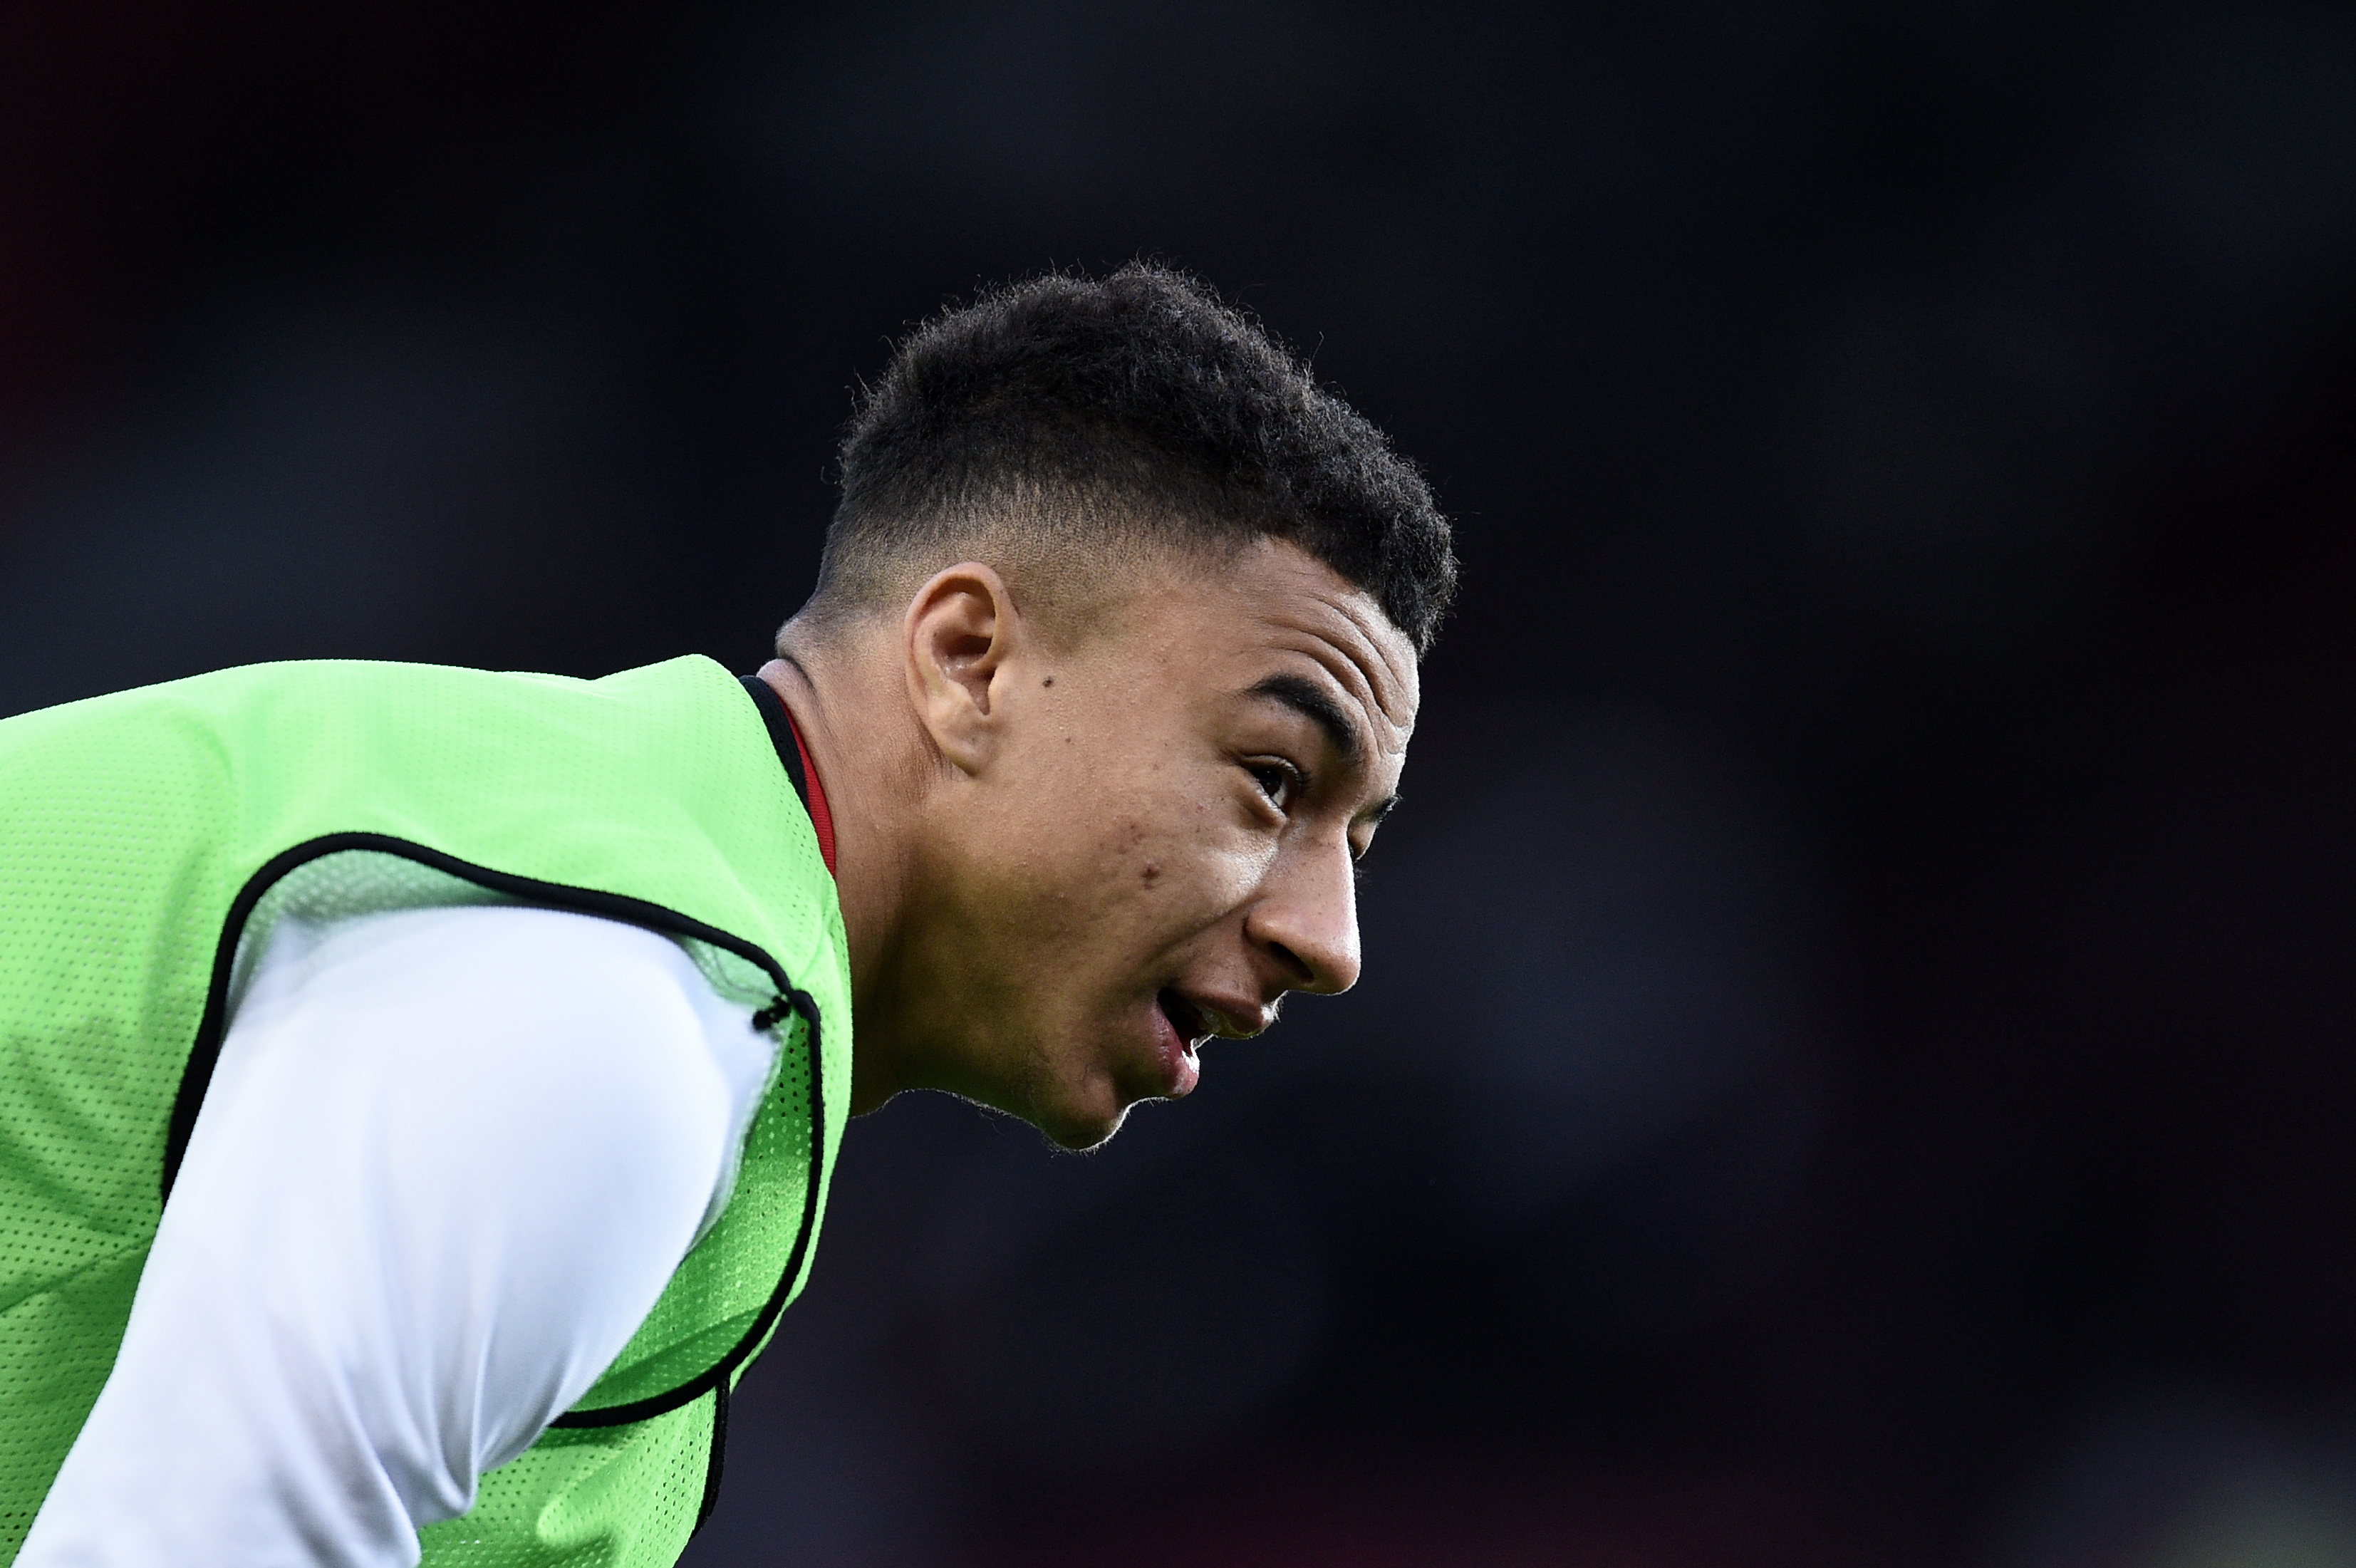 Manchester United's English midfielder Jesse Lingard warms up ahead of the English Premier League football match between Manchester United and Everton at Old Trafford in Manchester, north west England, on April 4, 2017. / AFP PHOTO / Oli SCARFF / RESTRICTED TO EDITORIAL USE. No use with unauthorized audio, video, data, fixture lists, club/league logos or 'live' services. Online in-match use limited to 75 images, no video emulation. No use in betting, games or single club/league/player publications.  /         (Photo credit should read OLI SCARFF/AFP/Getty Images)